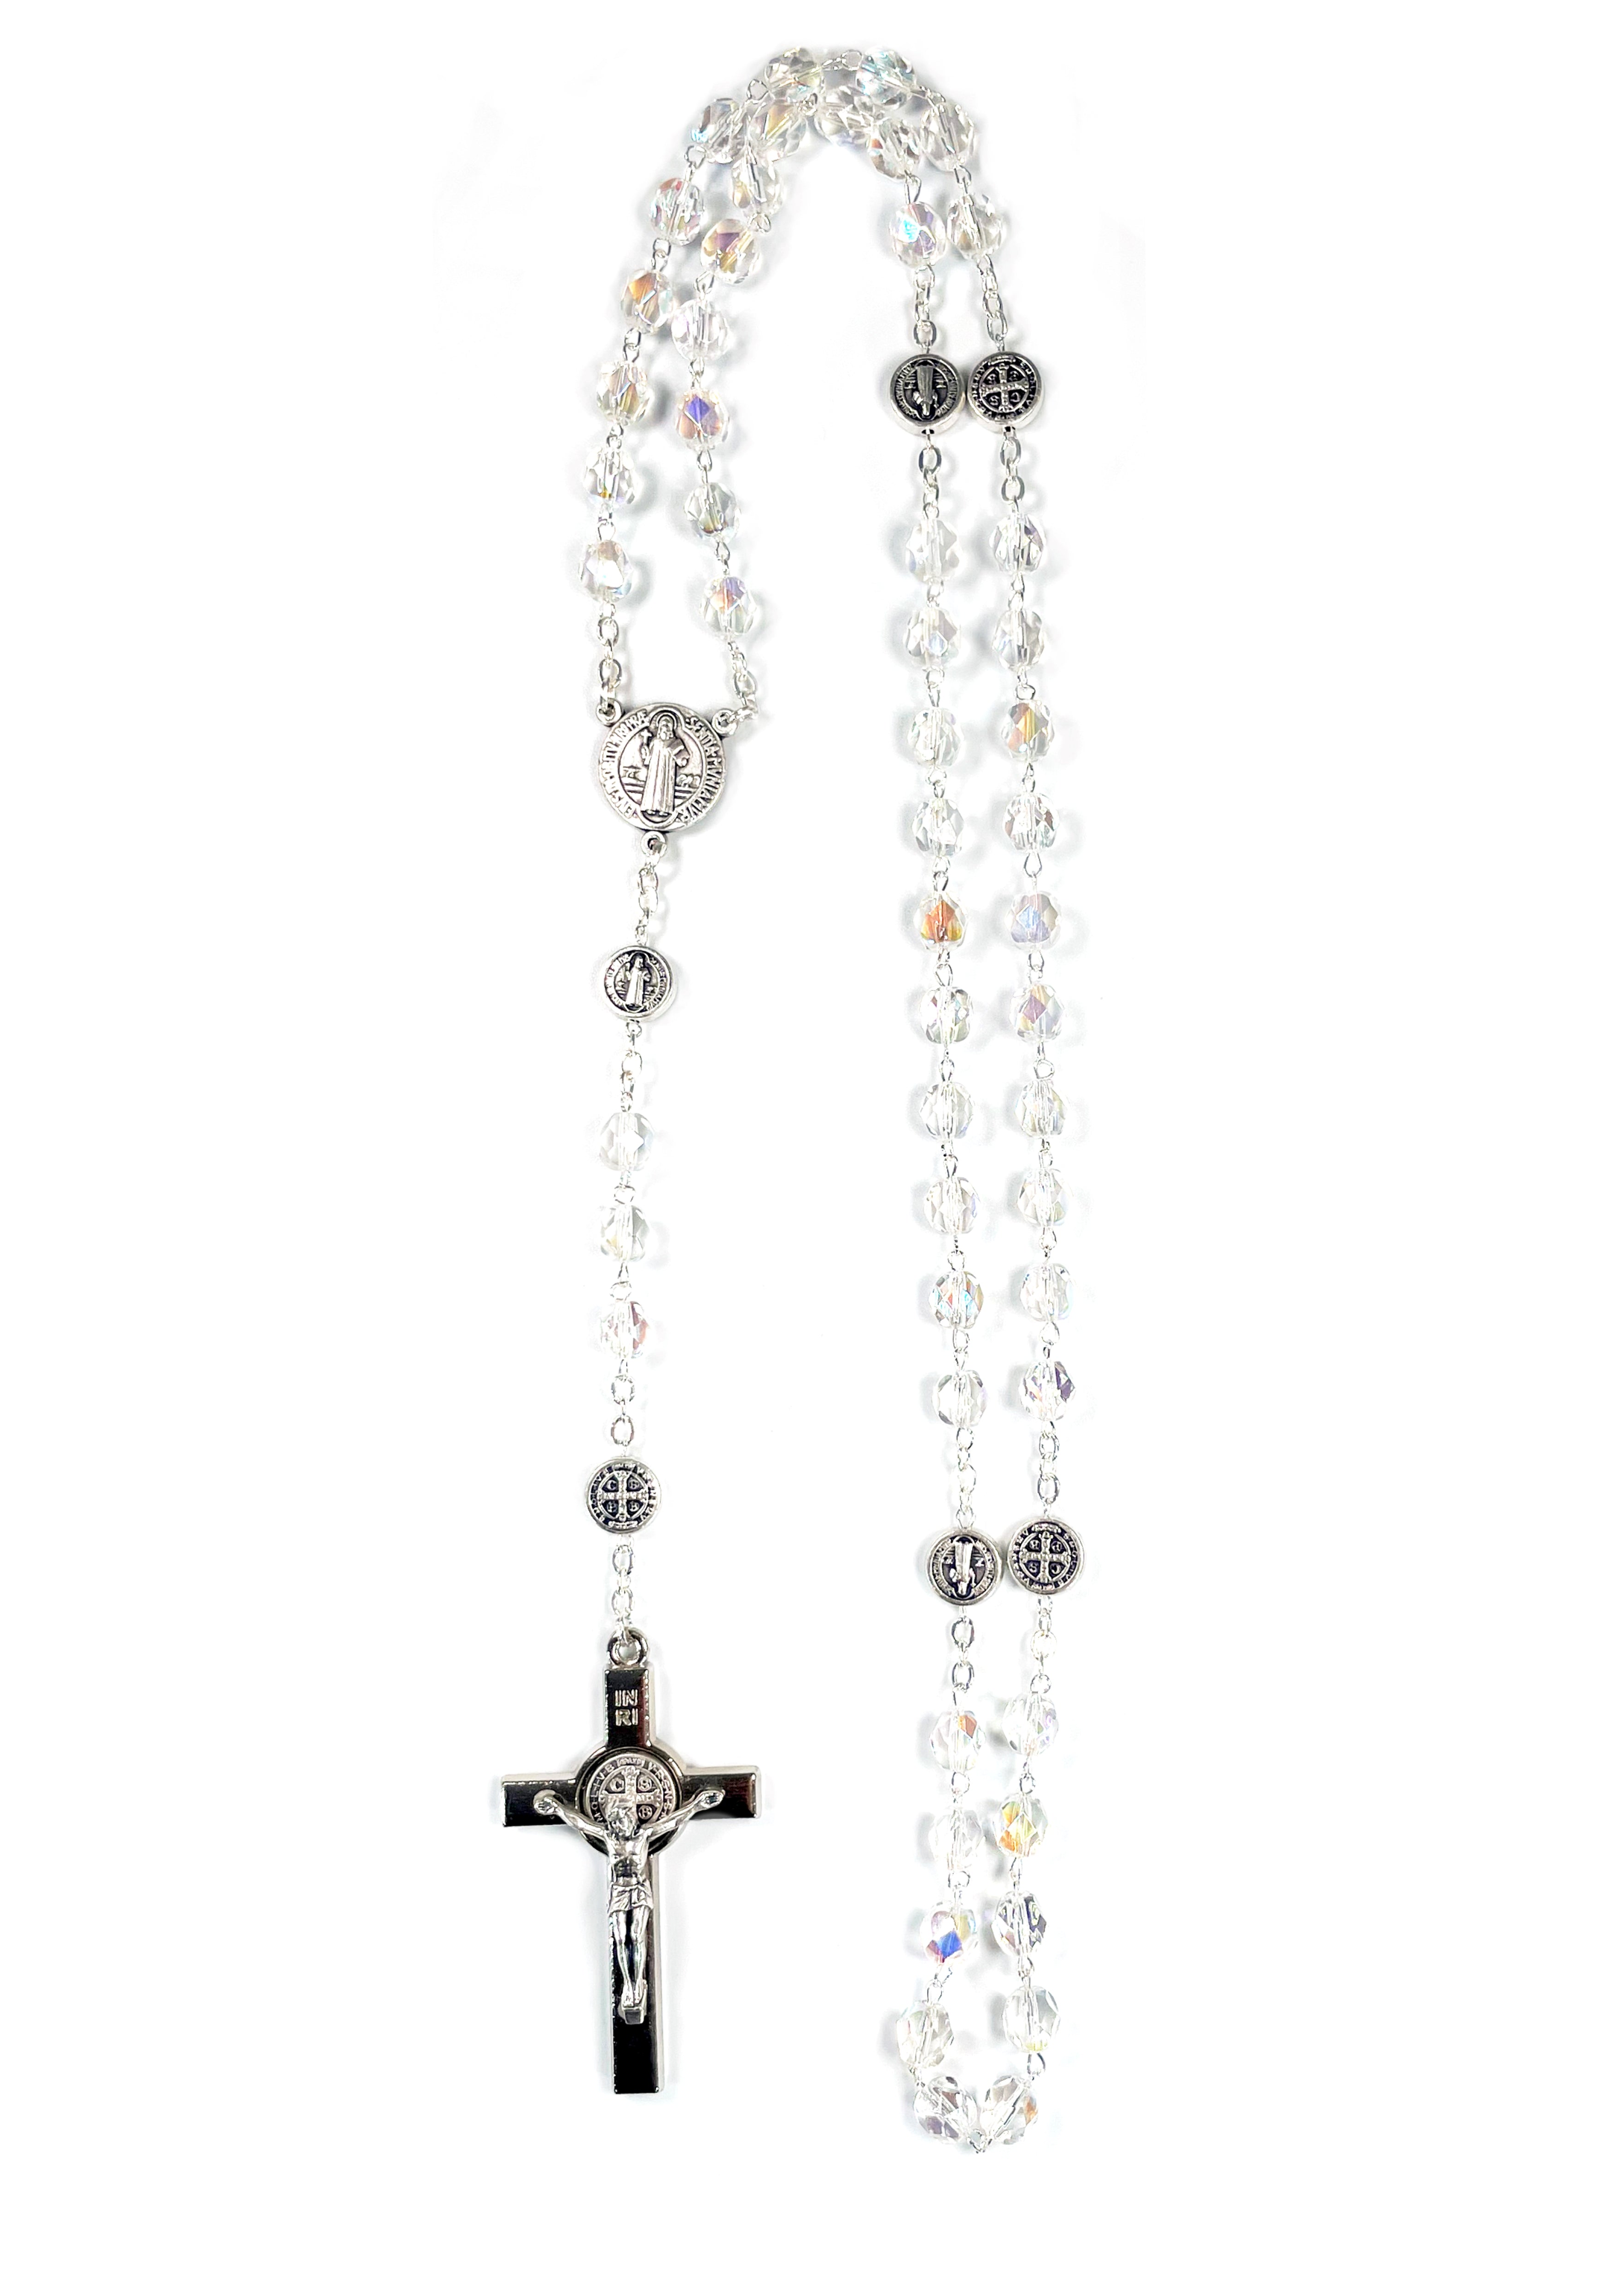 Saint Benedict clear crystal rosary